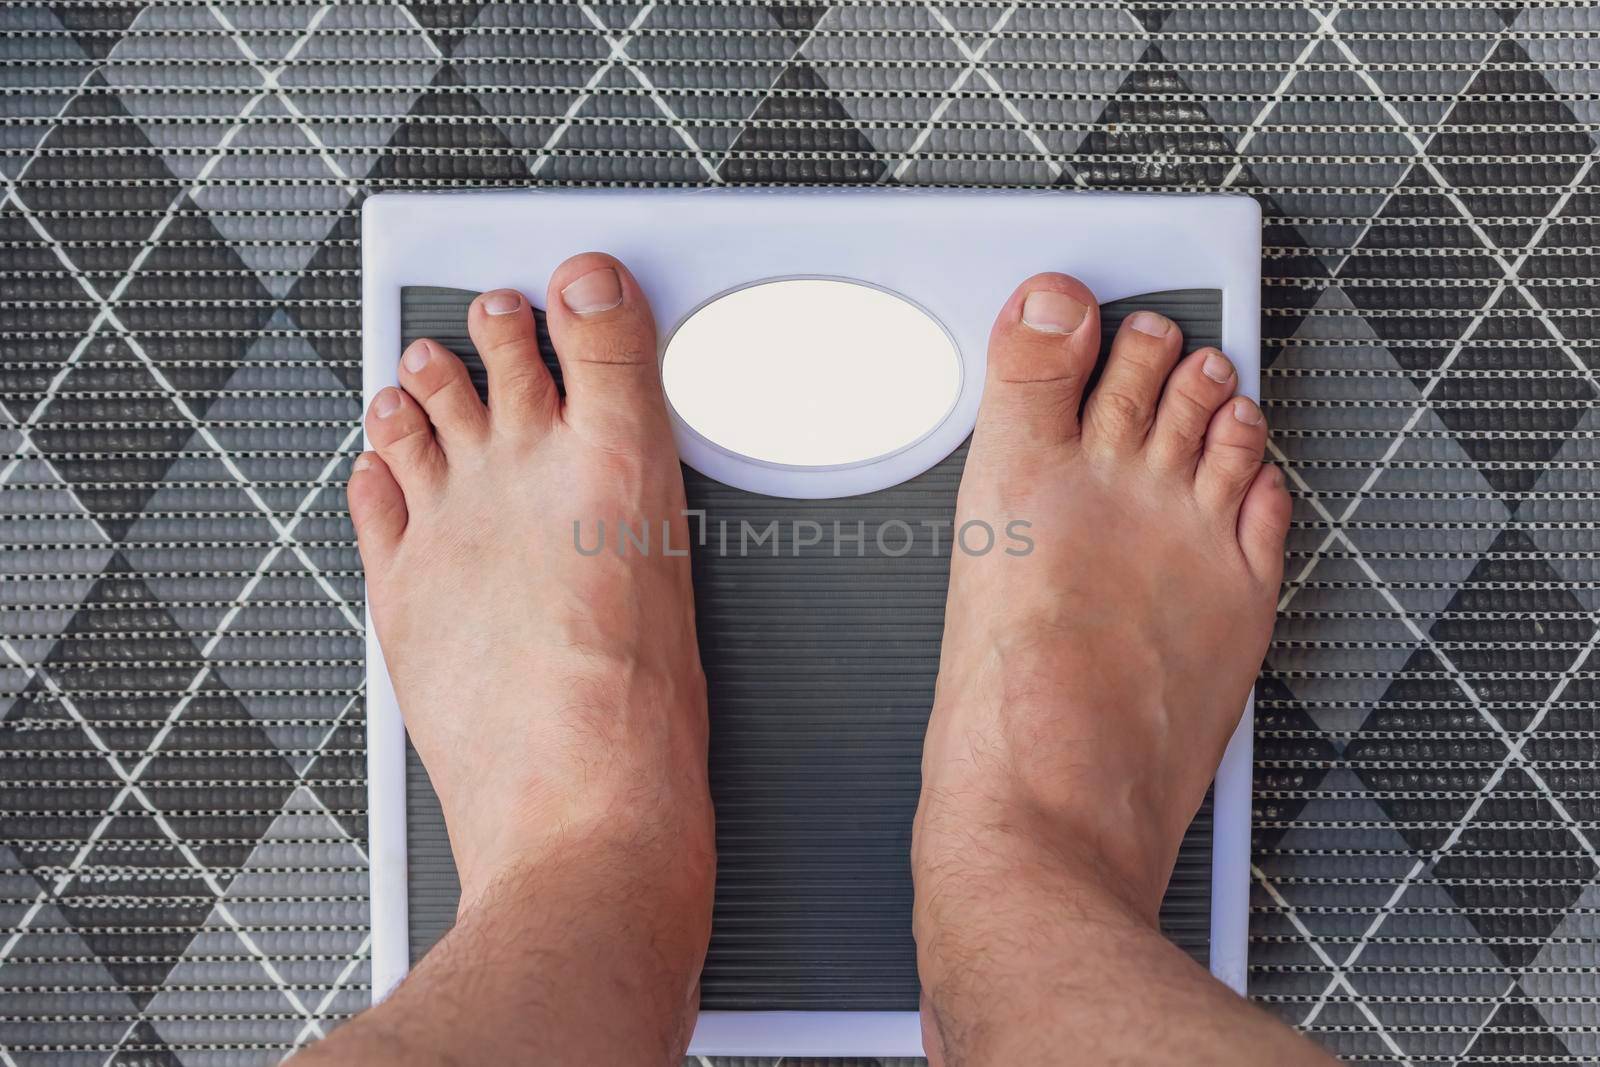 A man measures his weight on floor scales while standing barefoot